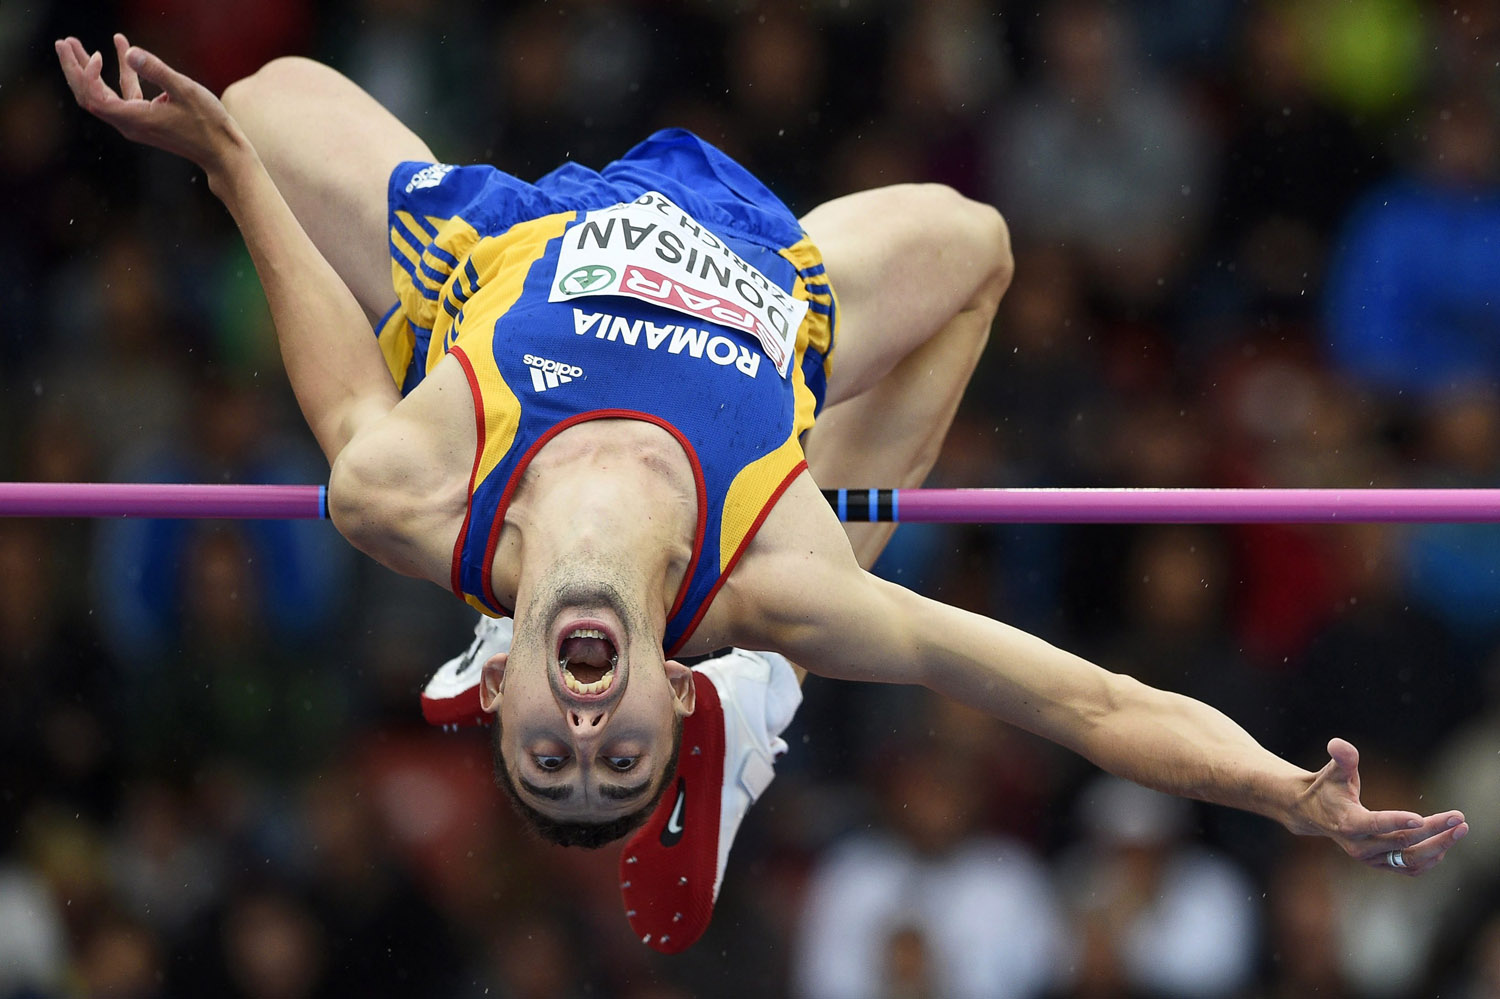 Aug. 13, 2014.  Mihai Donisan from Romania competes in the men's High Jump qualifying event during the European Athletics Championships 2014 in the Letzigrund Stadium in Zurich, Switzerland.